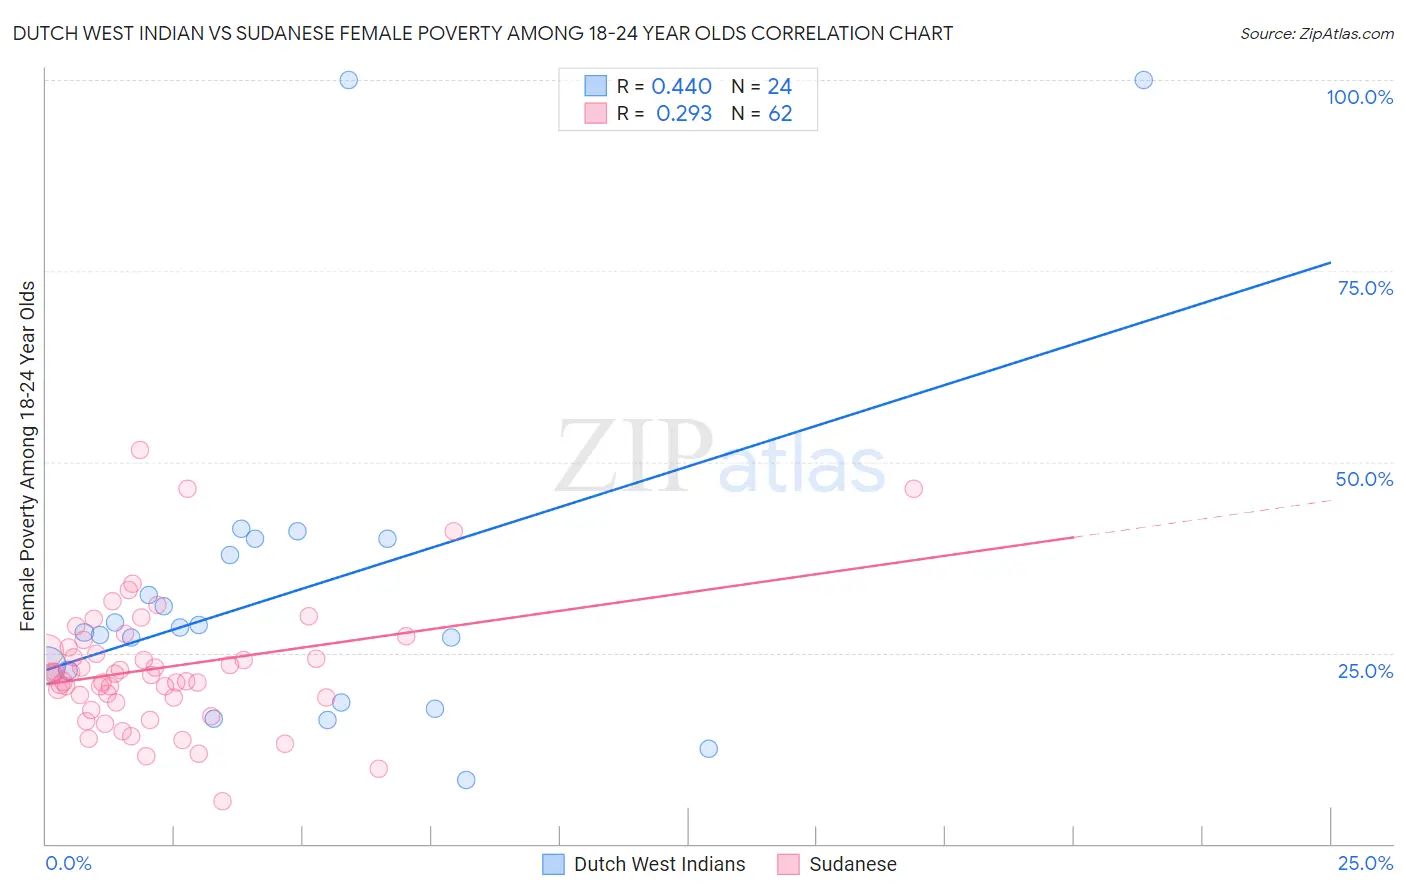 Dutch West Indian vs Sudanese Female Poverty Among 18-24 Year Olds